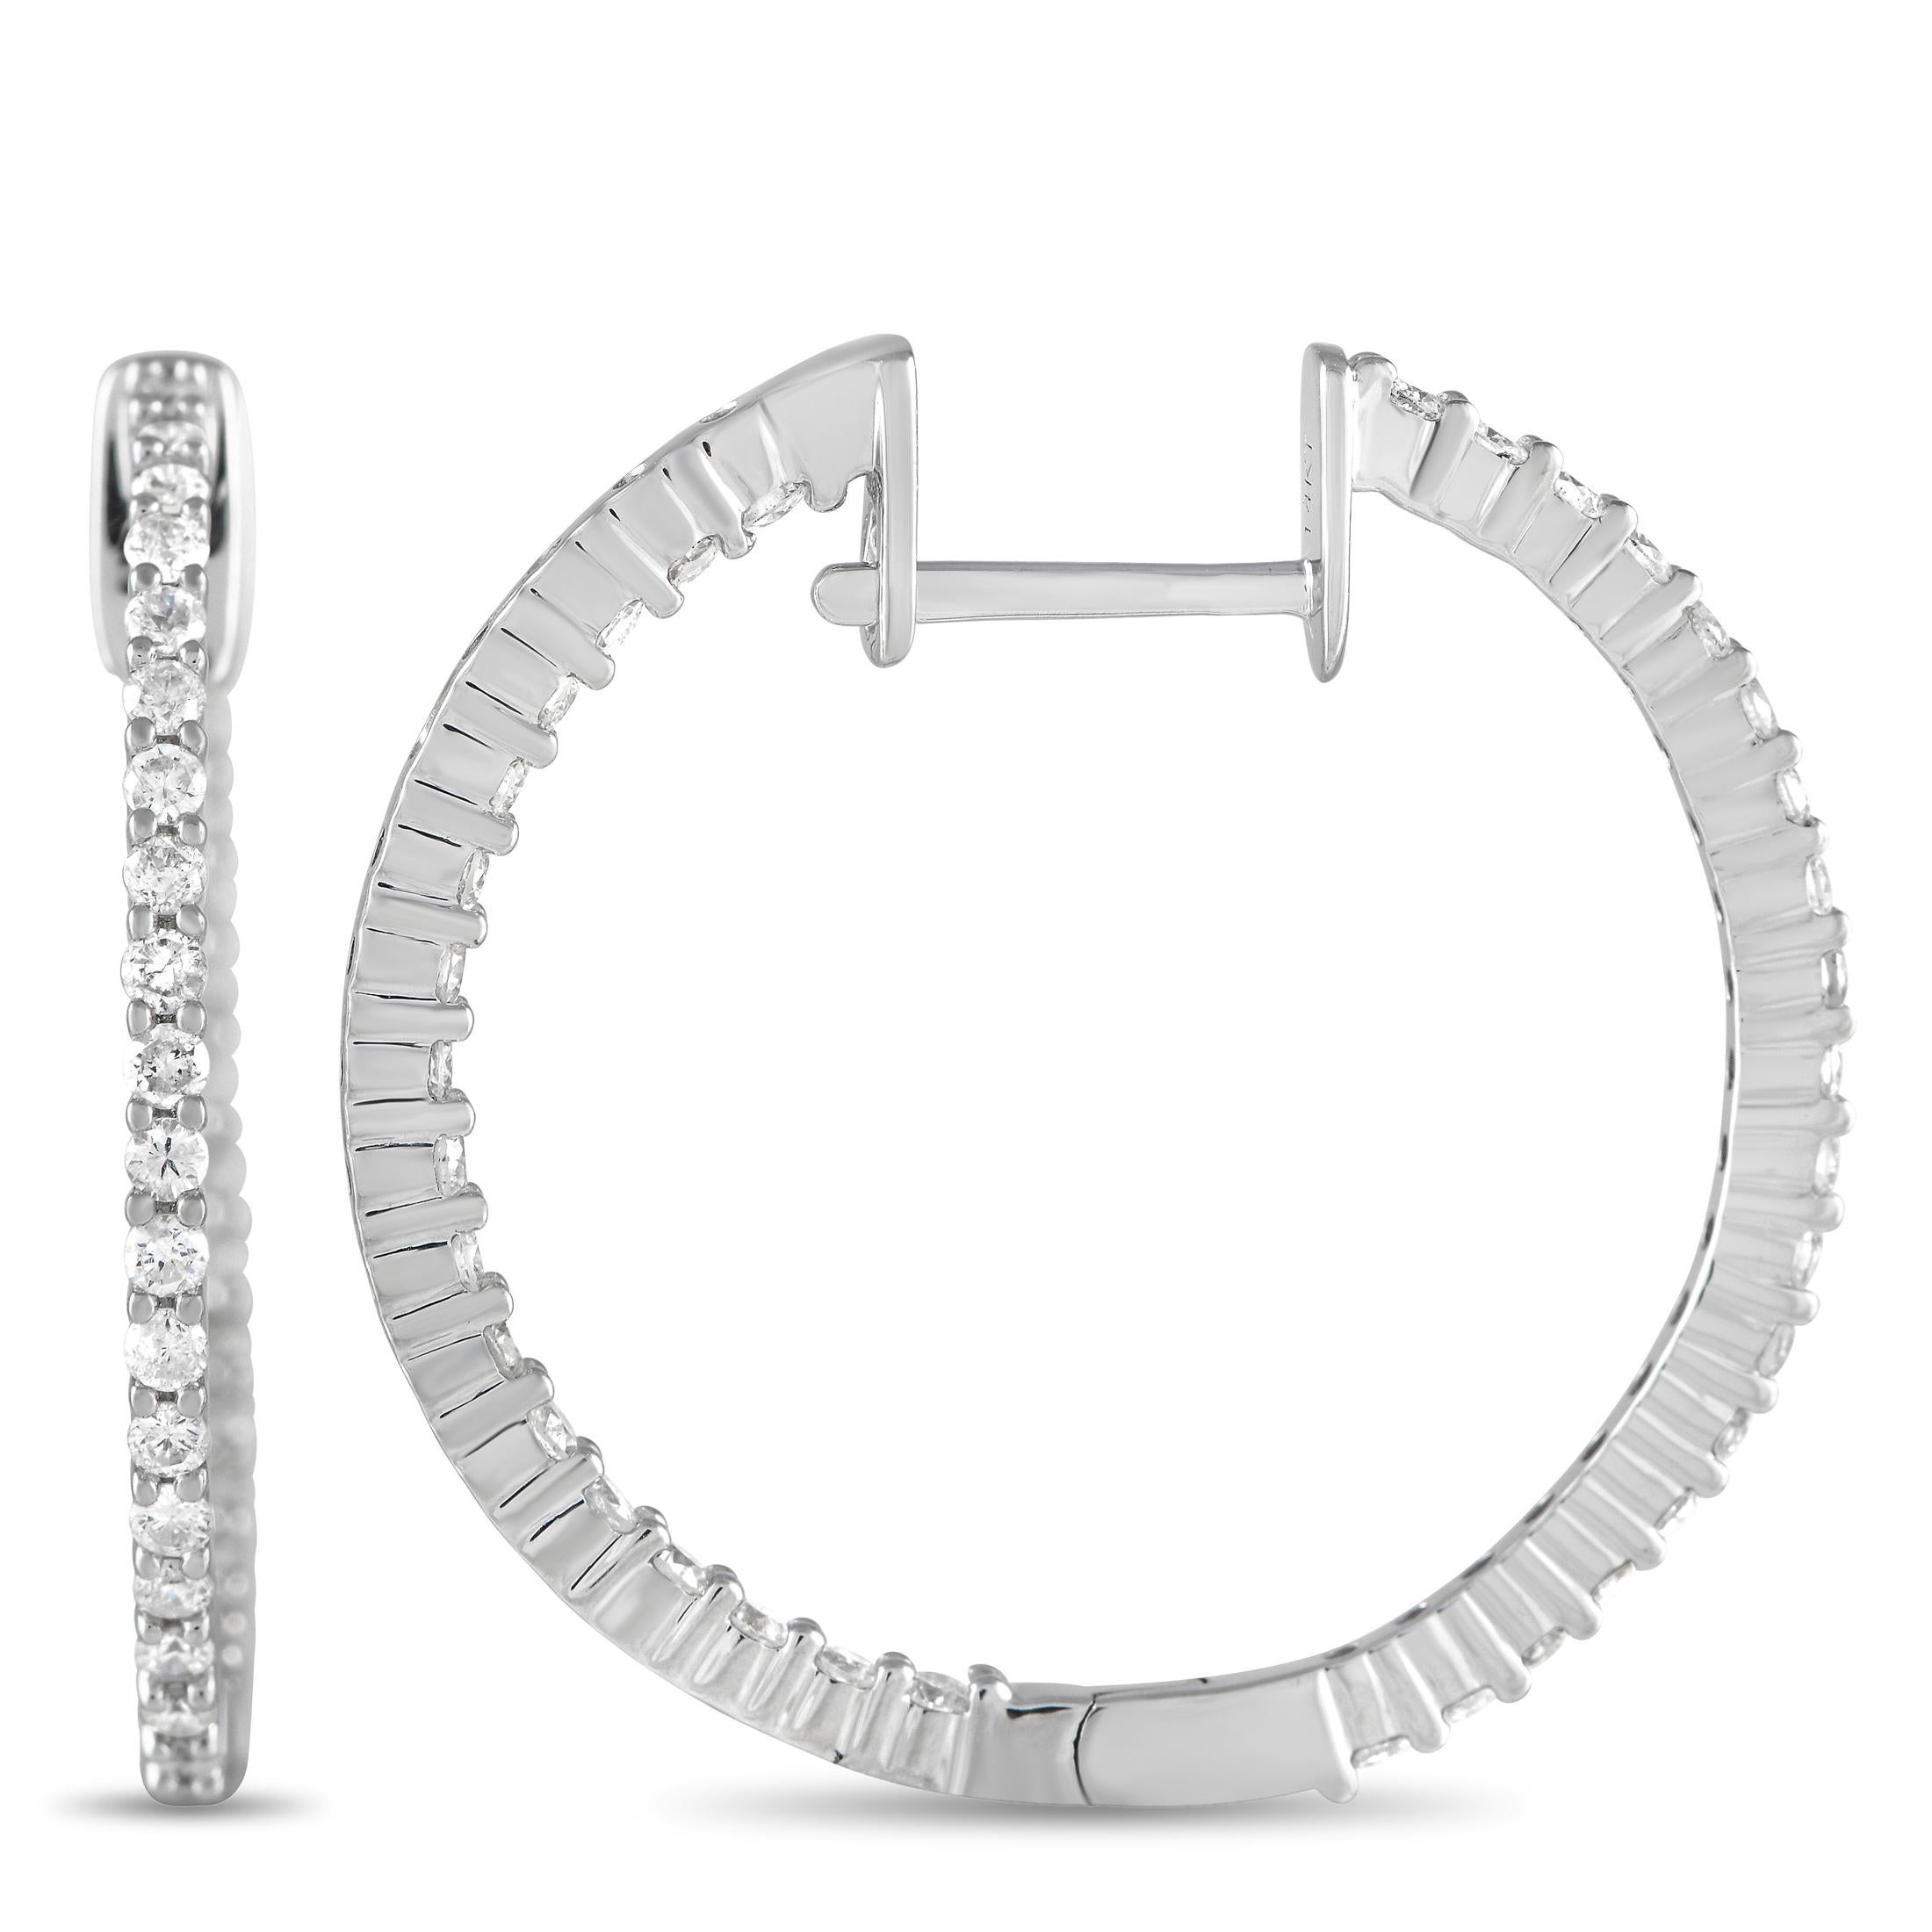 These subtle and sleek hoops can easily transition from work to date nights. They're exquisitely crafted in cool white gold with brilliant diamonds tracing their outer front edge and inner back edge. Each hoop measures 1